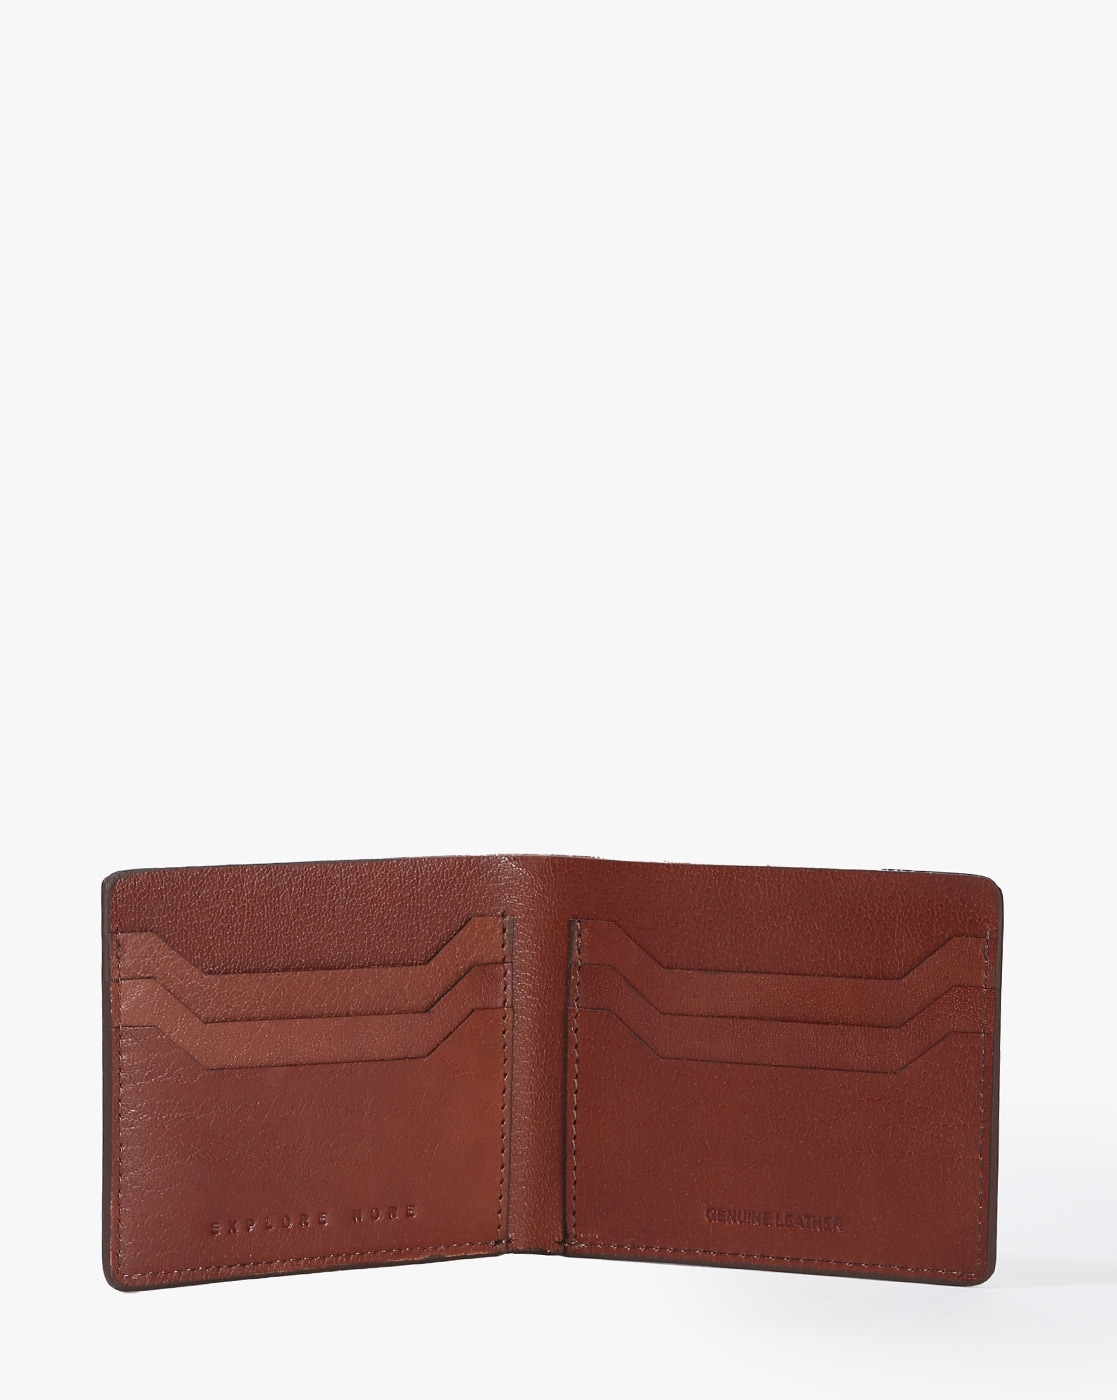 Buy Woodland Genuine Leather Gents Wallet/Purse With Card Slots For Men/Boys  - Tan at Amazon.in